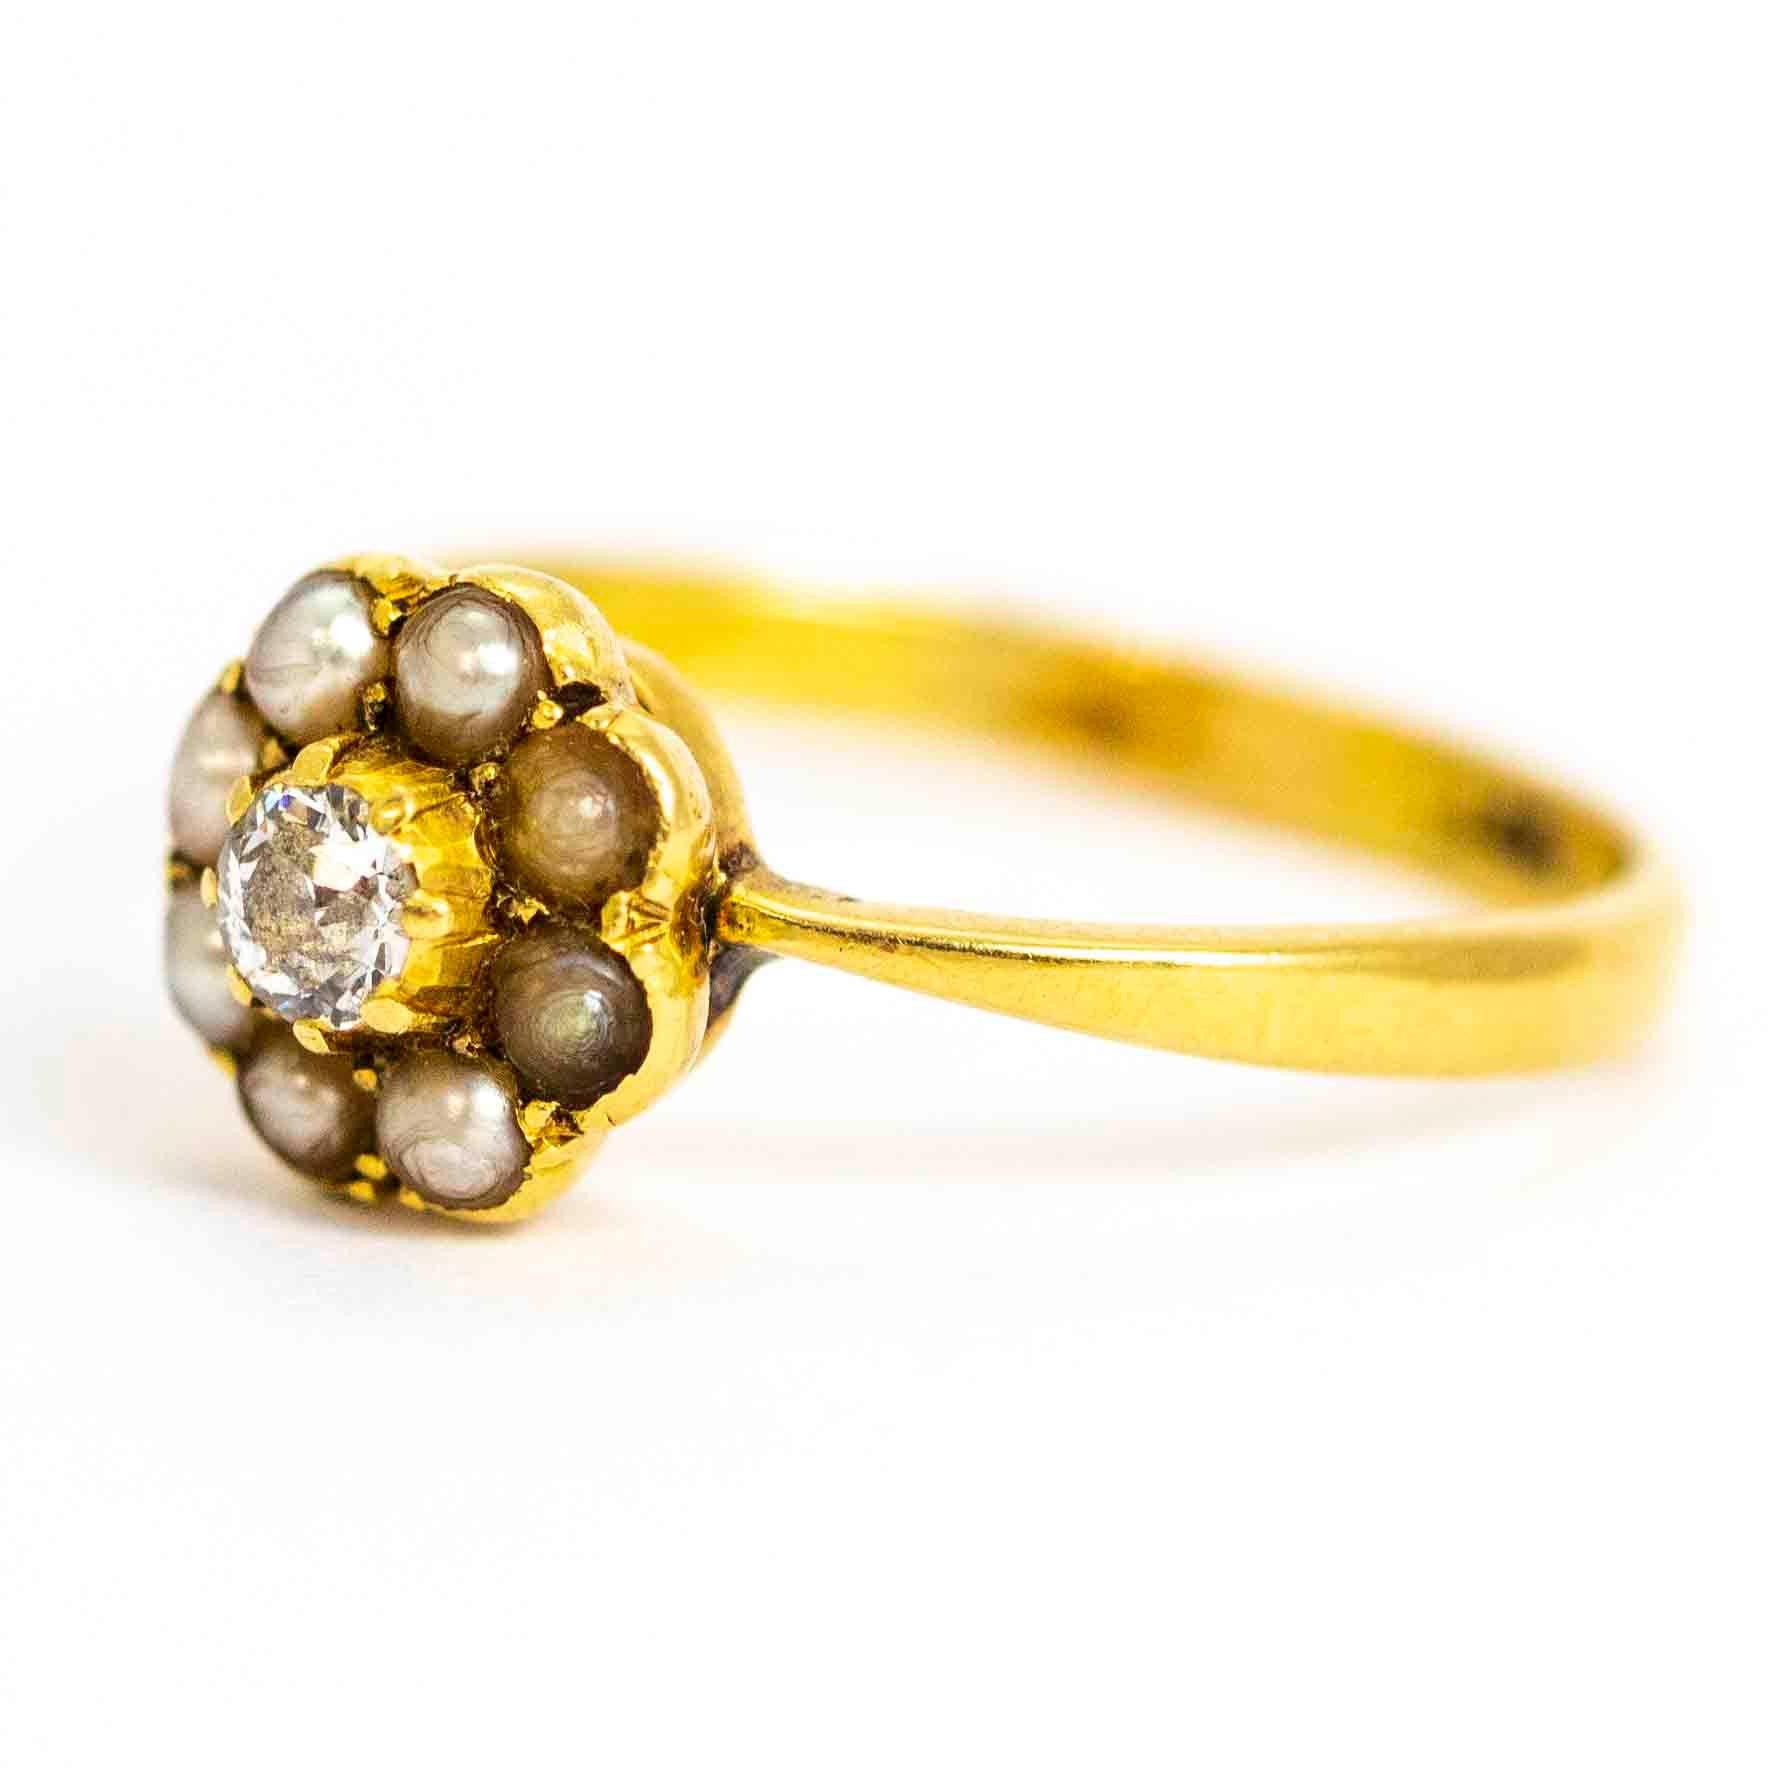 A wonderful vintage cluster ring. Centrally set with a magnificent 18 point cushion cut diamond surrounded by a beautiful halo of pearls. Modelled in 18 carat yellow gold.

Ring Size: UK L, US 6

Cluster Width: 8.6mm